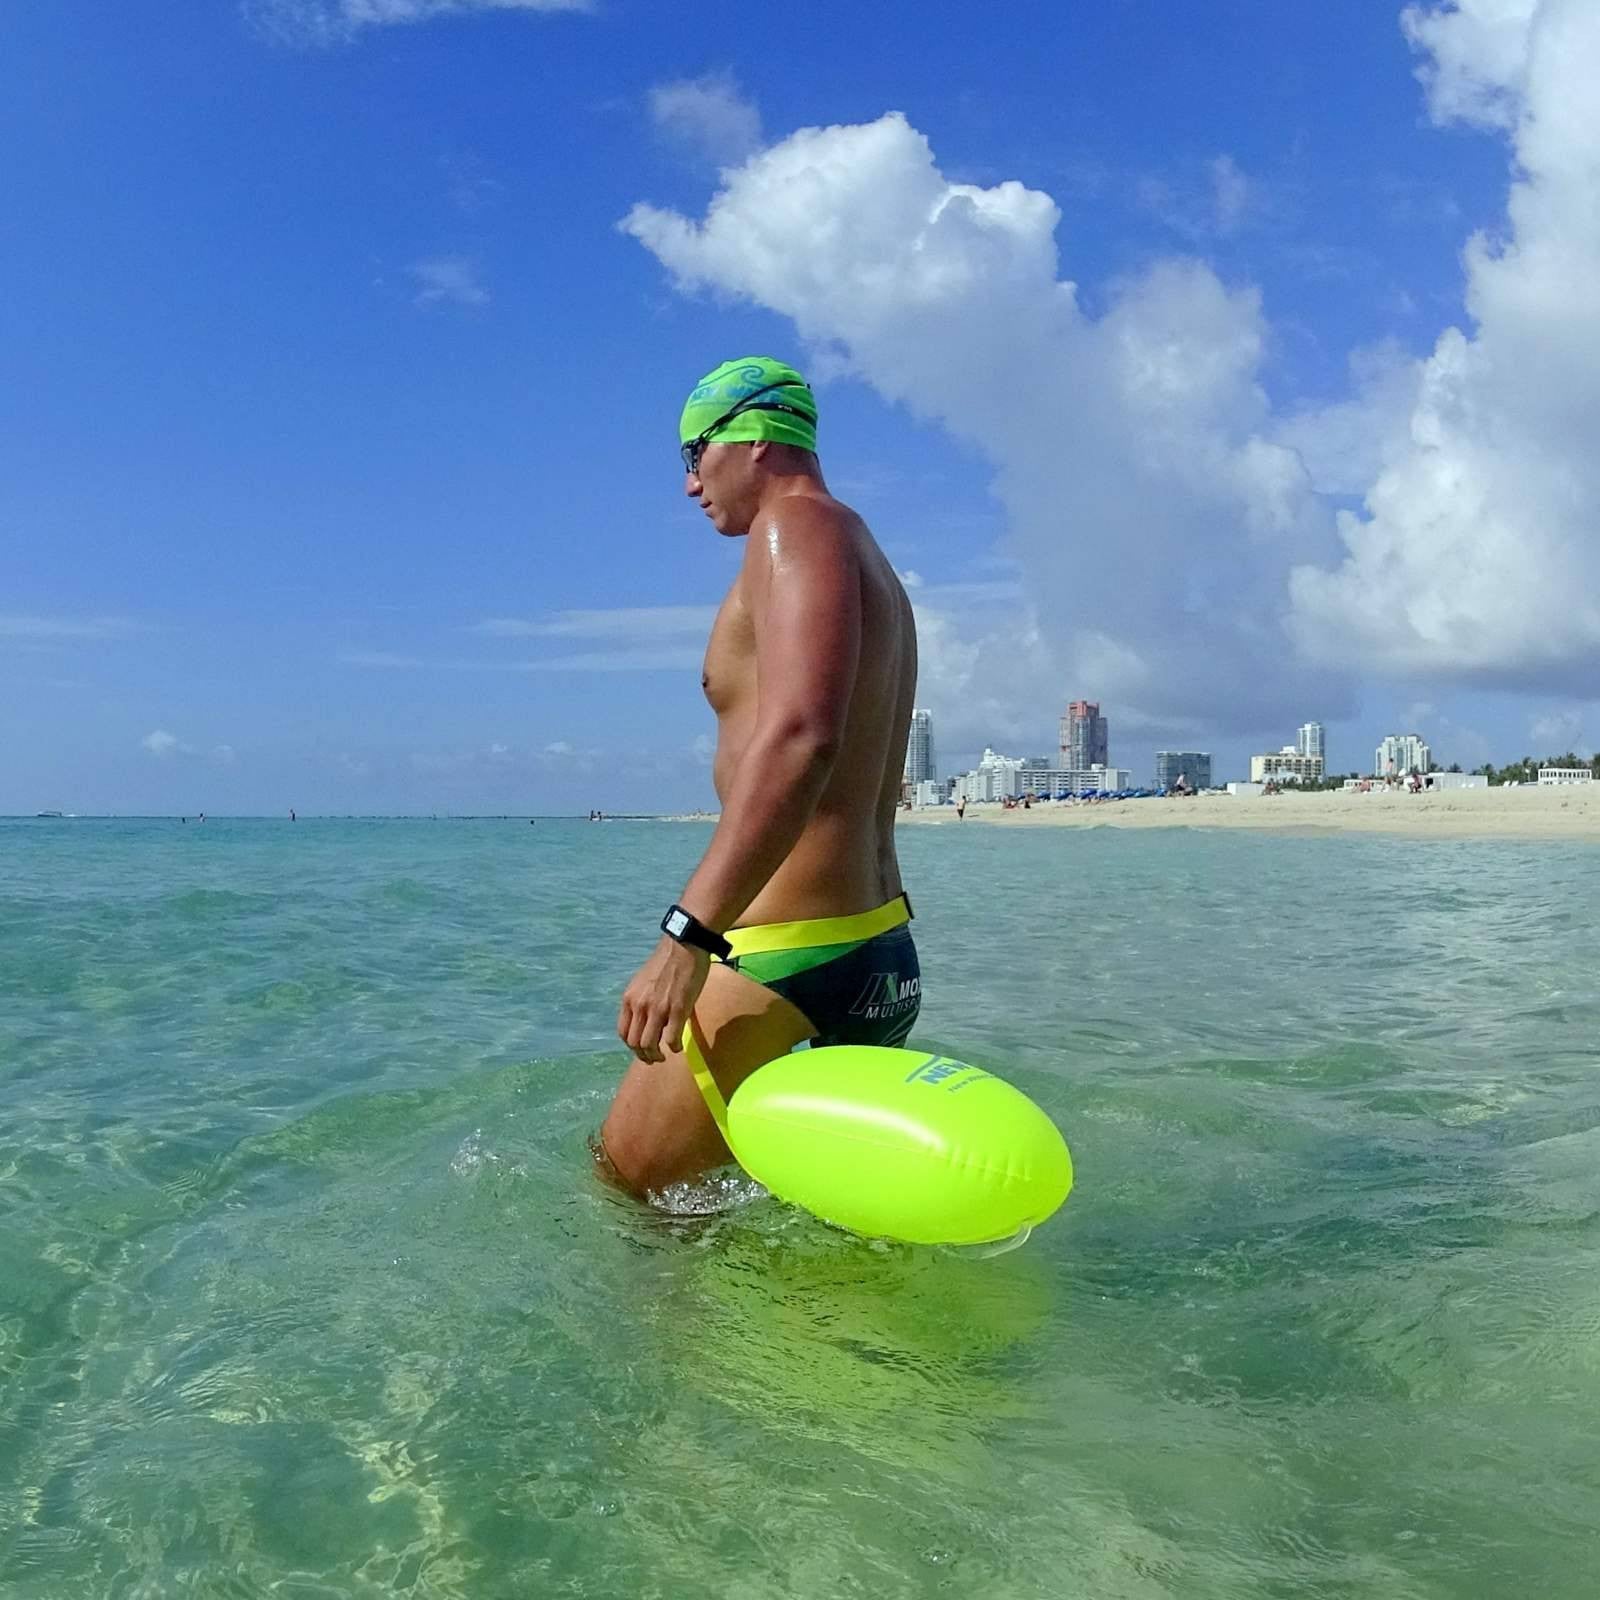 https://cdn.shopify.com/s/files/1/0935/8090/products/swim-buoy-new-wave-swim-bubble-for-open-water-swimmers-and-triathletes-green-2.jpg?v=1613915586